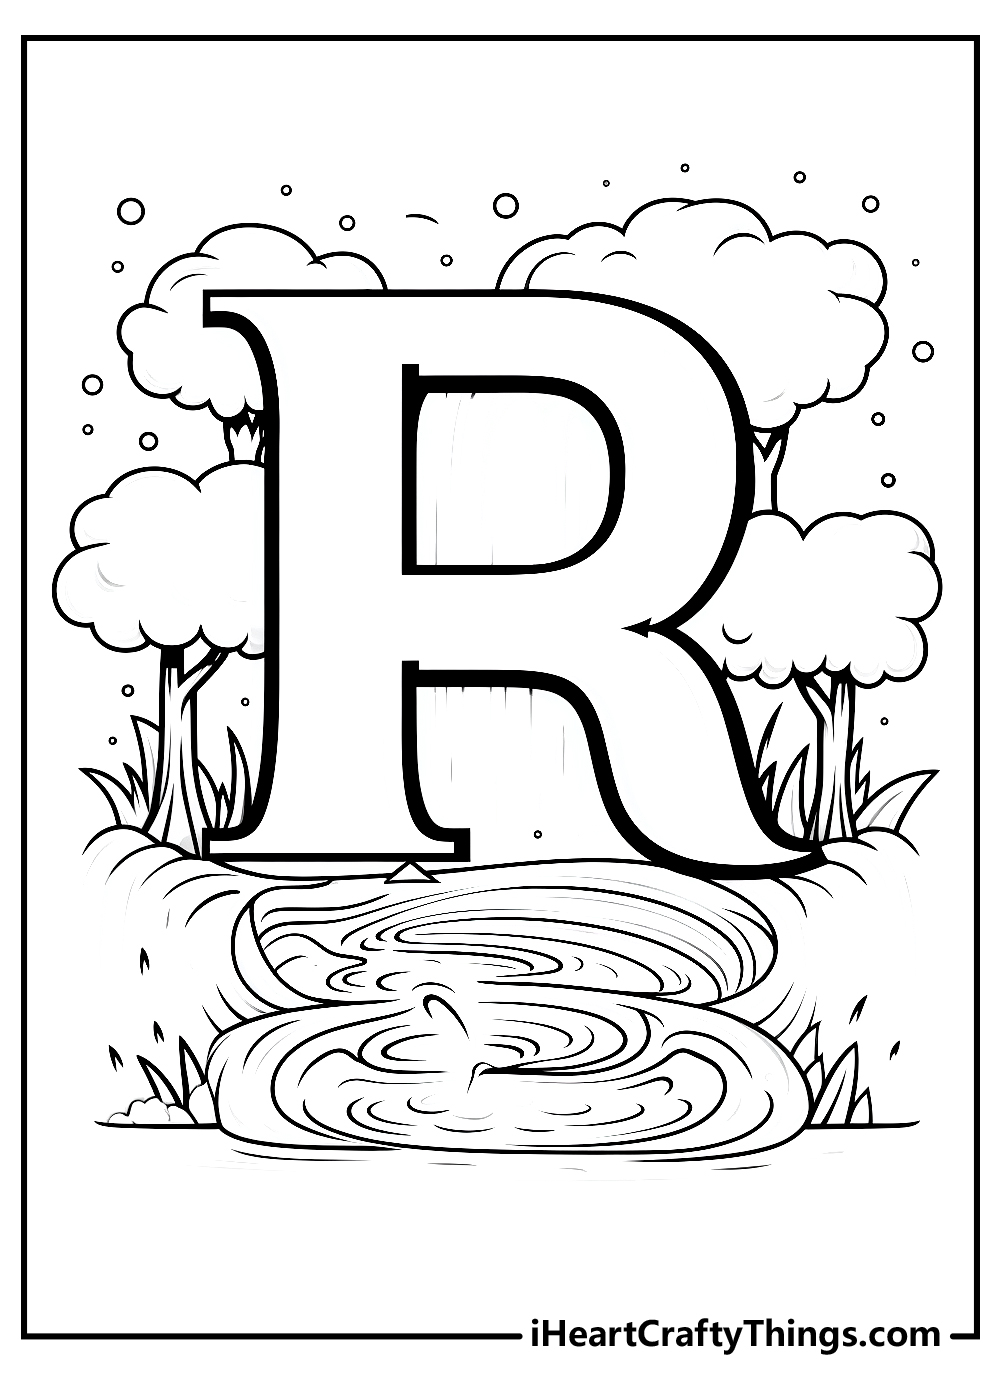 capital letter R coloring printable